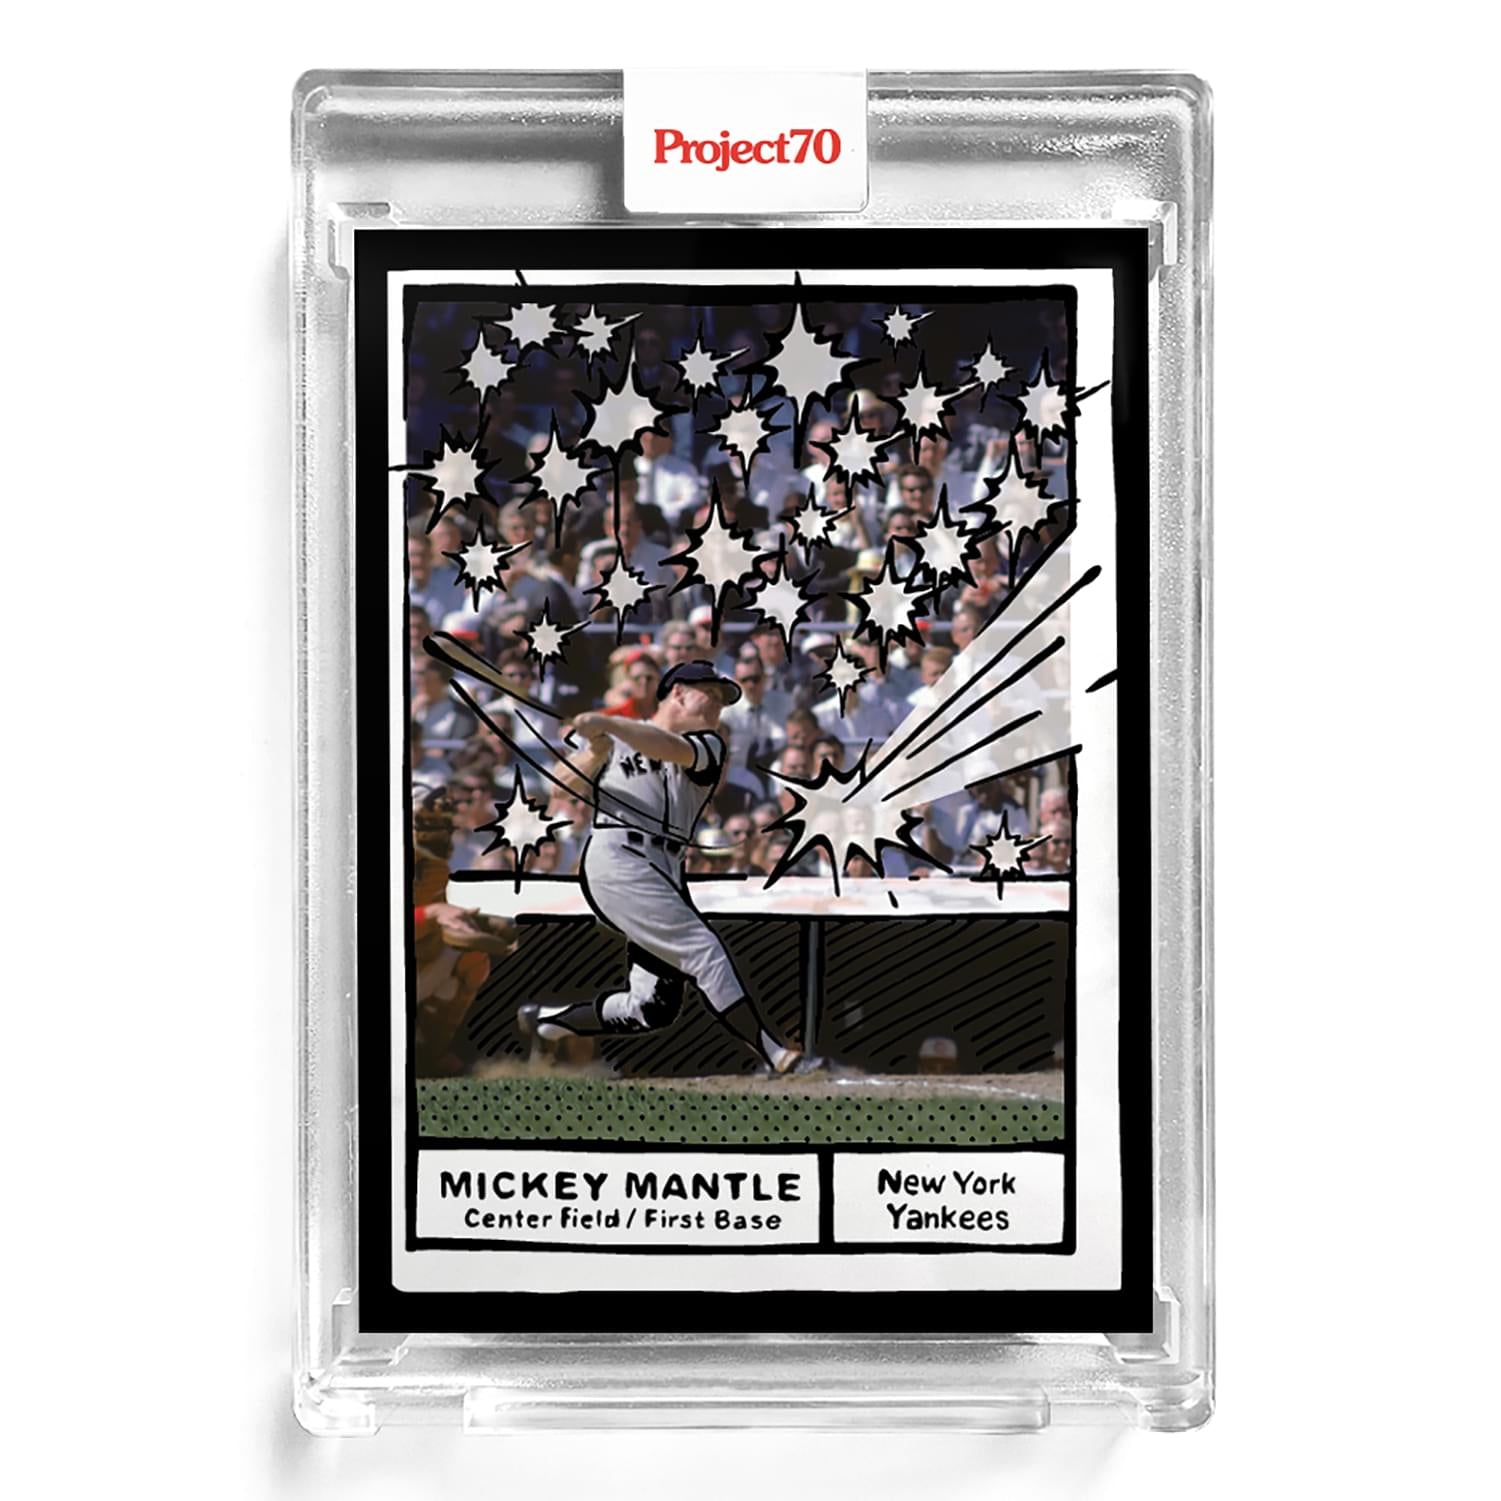 Topps Project70 Card 77 - 1961 Mickey Mantle by Joshua Vides